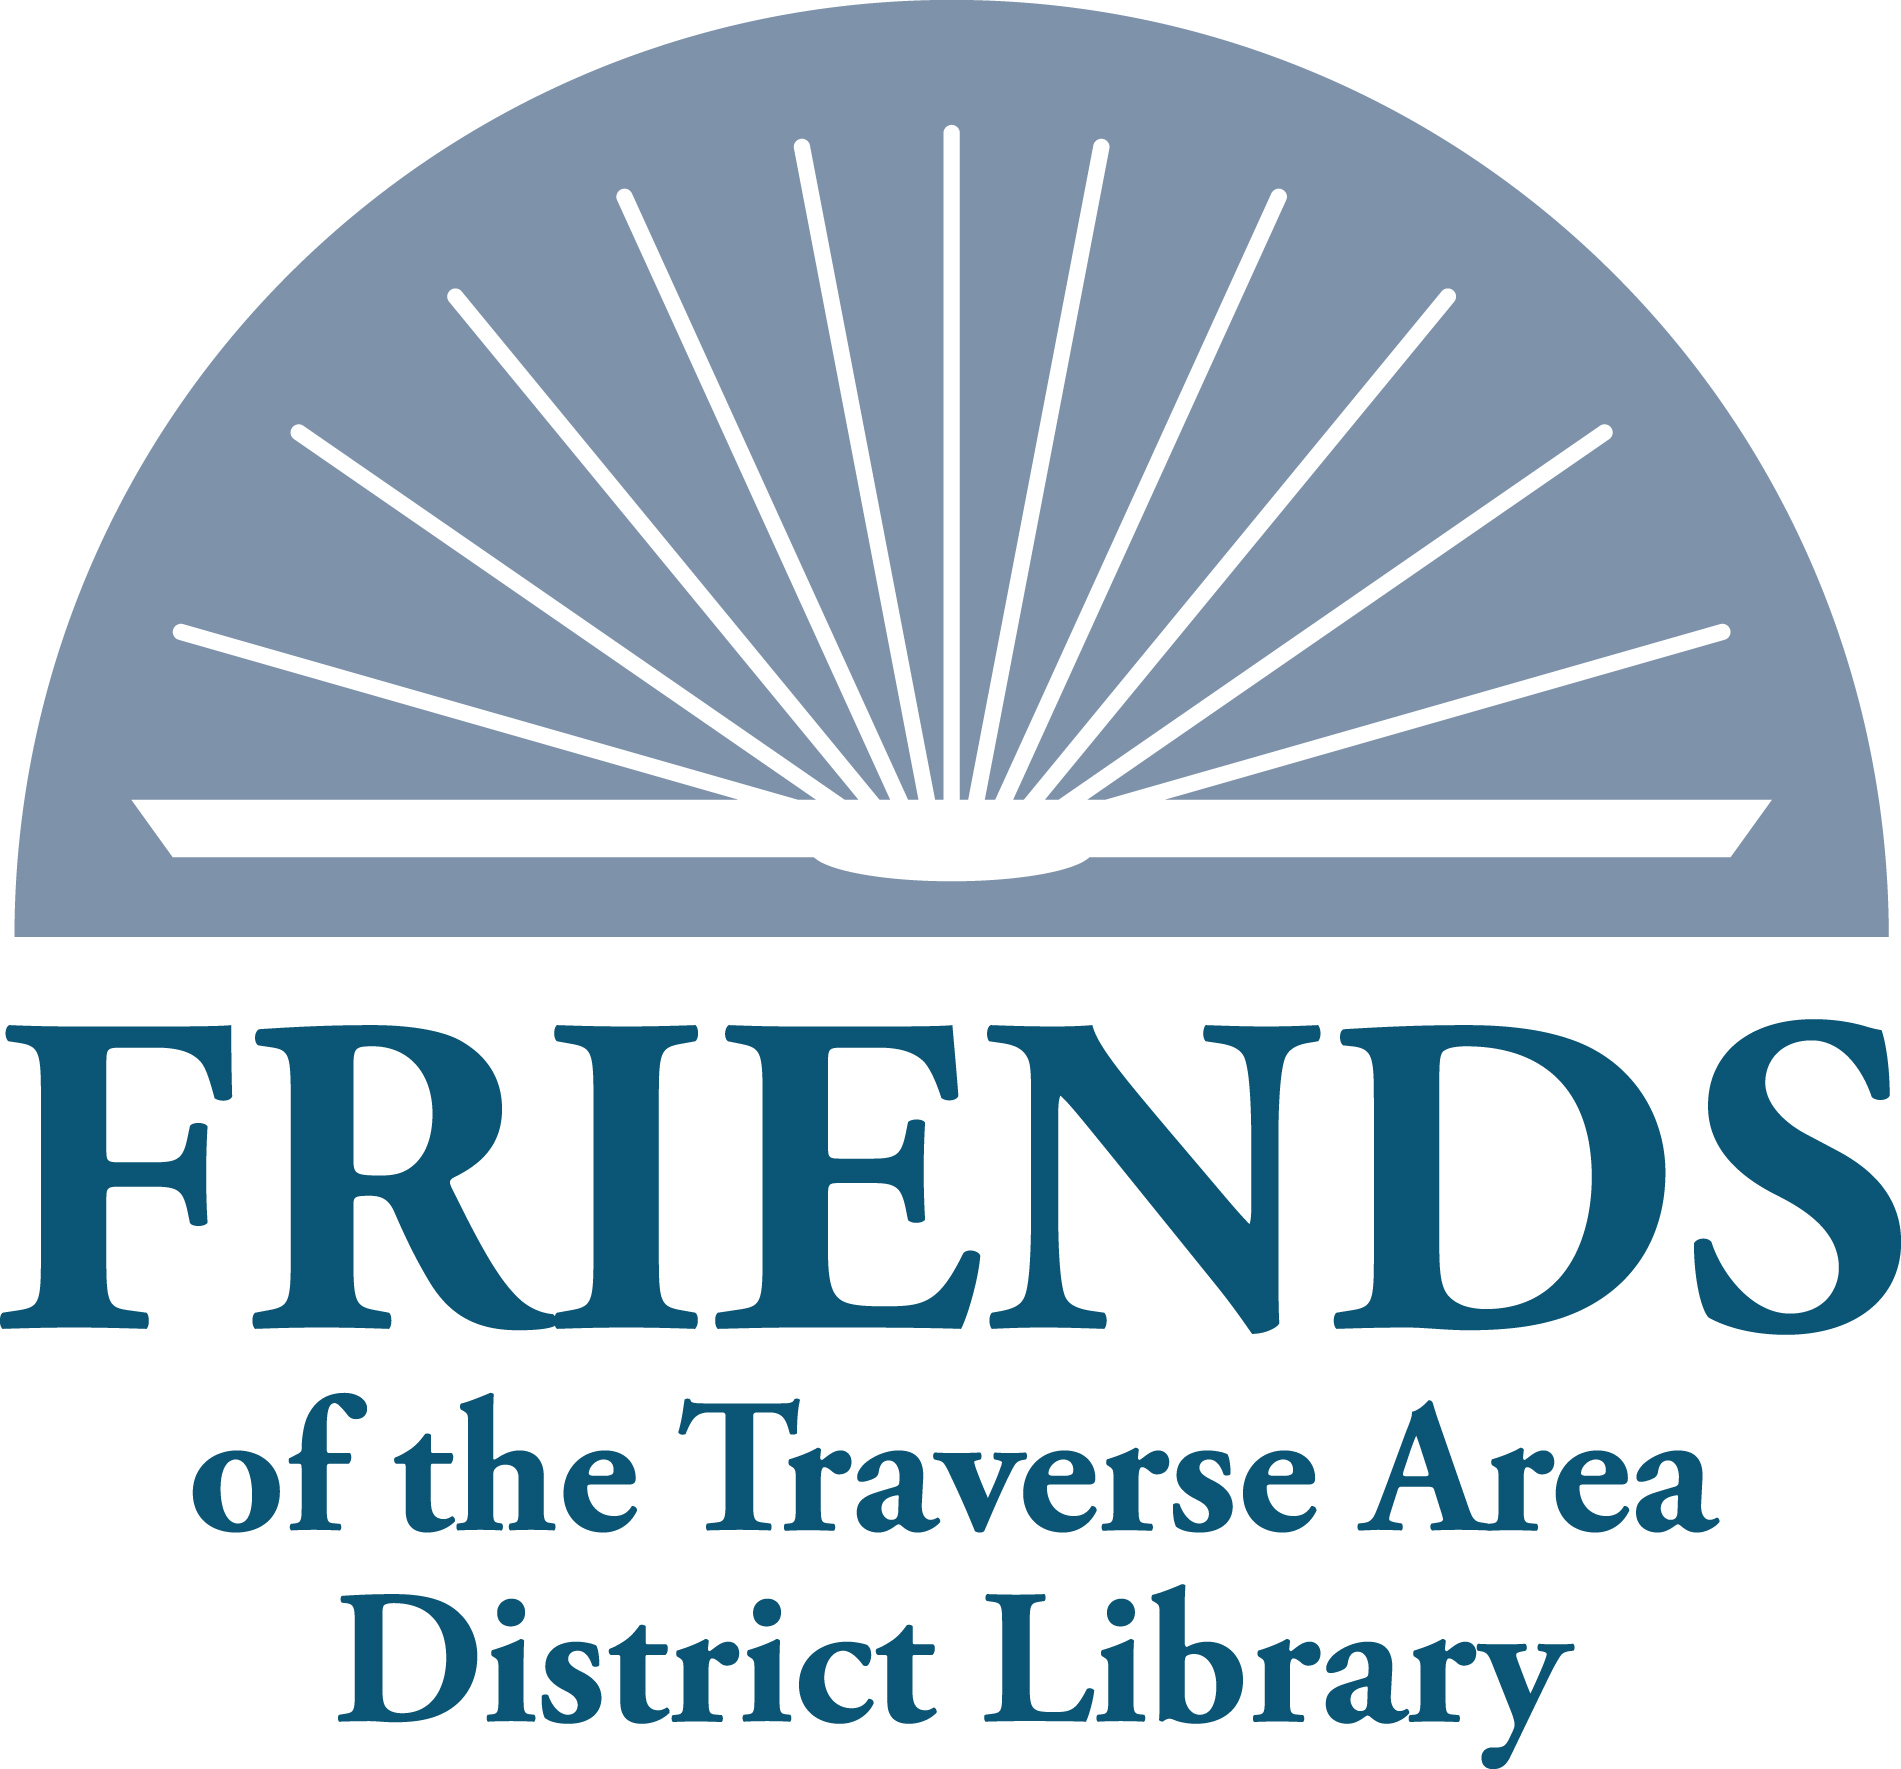 Open book with Friends of the Traverse Area District Library